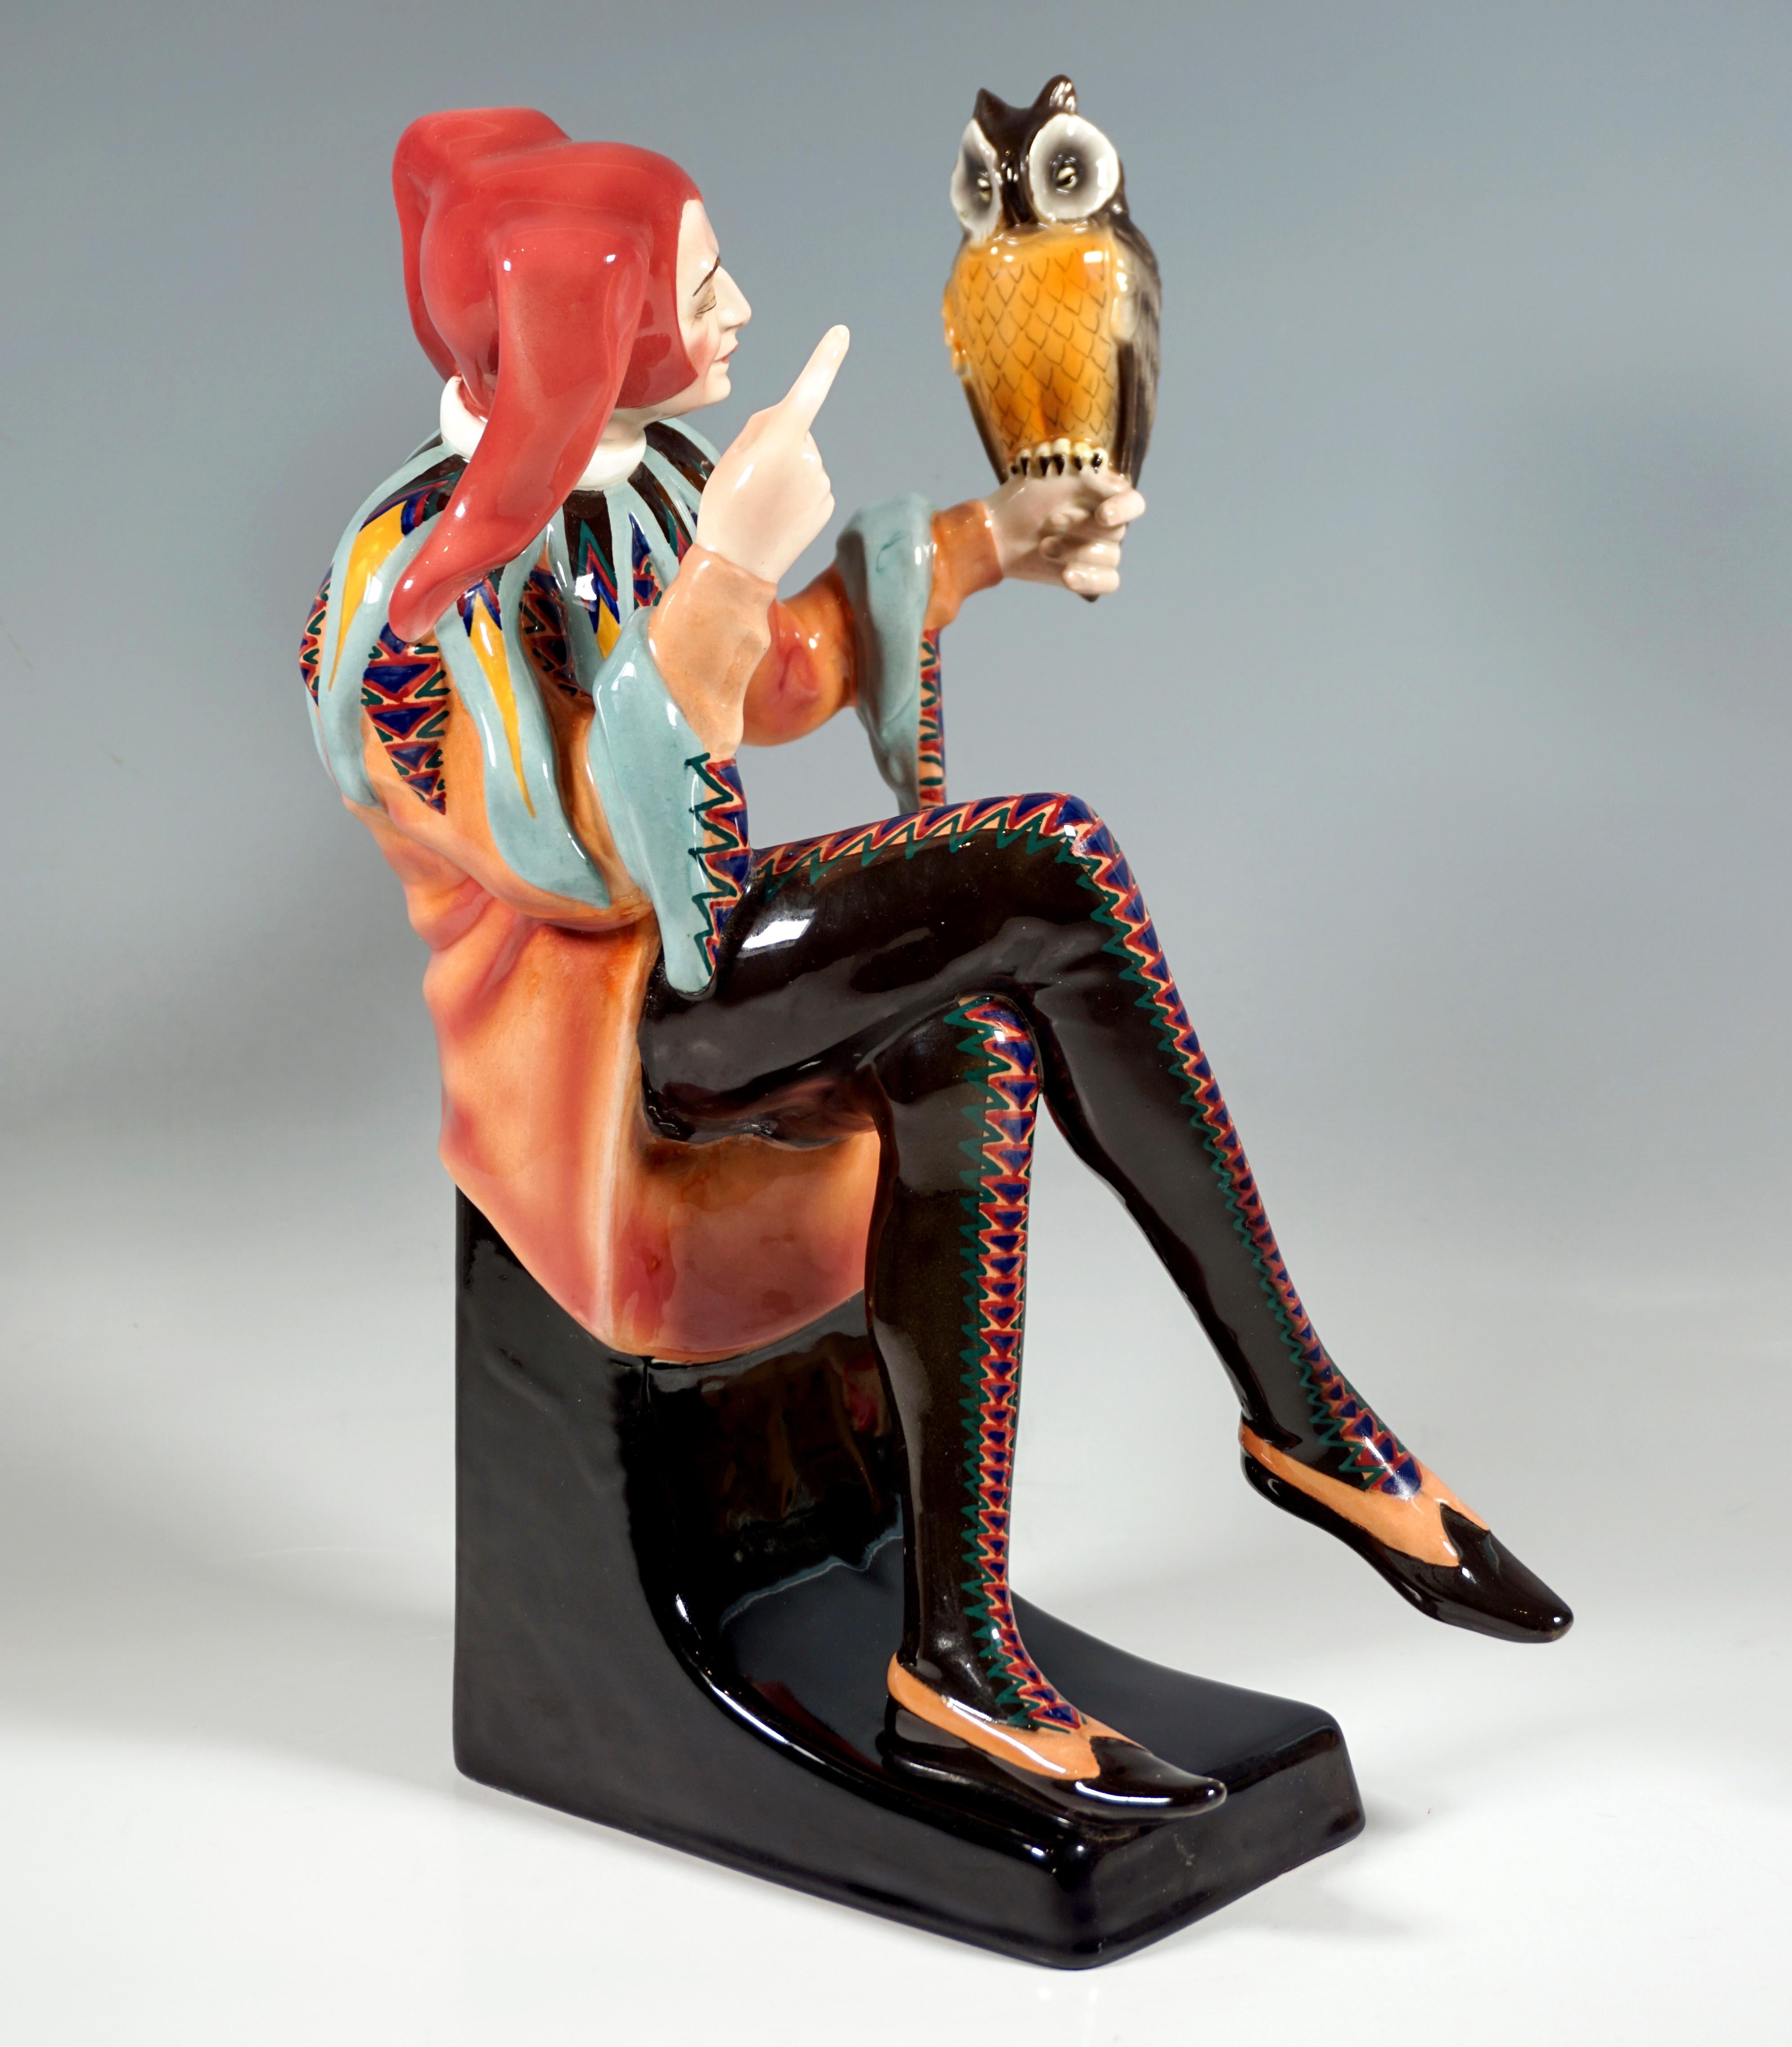 Exceptional Art Déco Goldscheider Figurine by Josef Lorenzl:
Man disguised as a jester with jester's cap, wide shirt and tight trousers with a zigzag pattern seated on a black pedestal, on his left outstretched hand an owl, symbol of prudence and